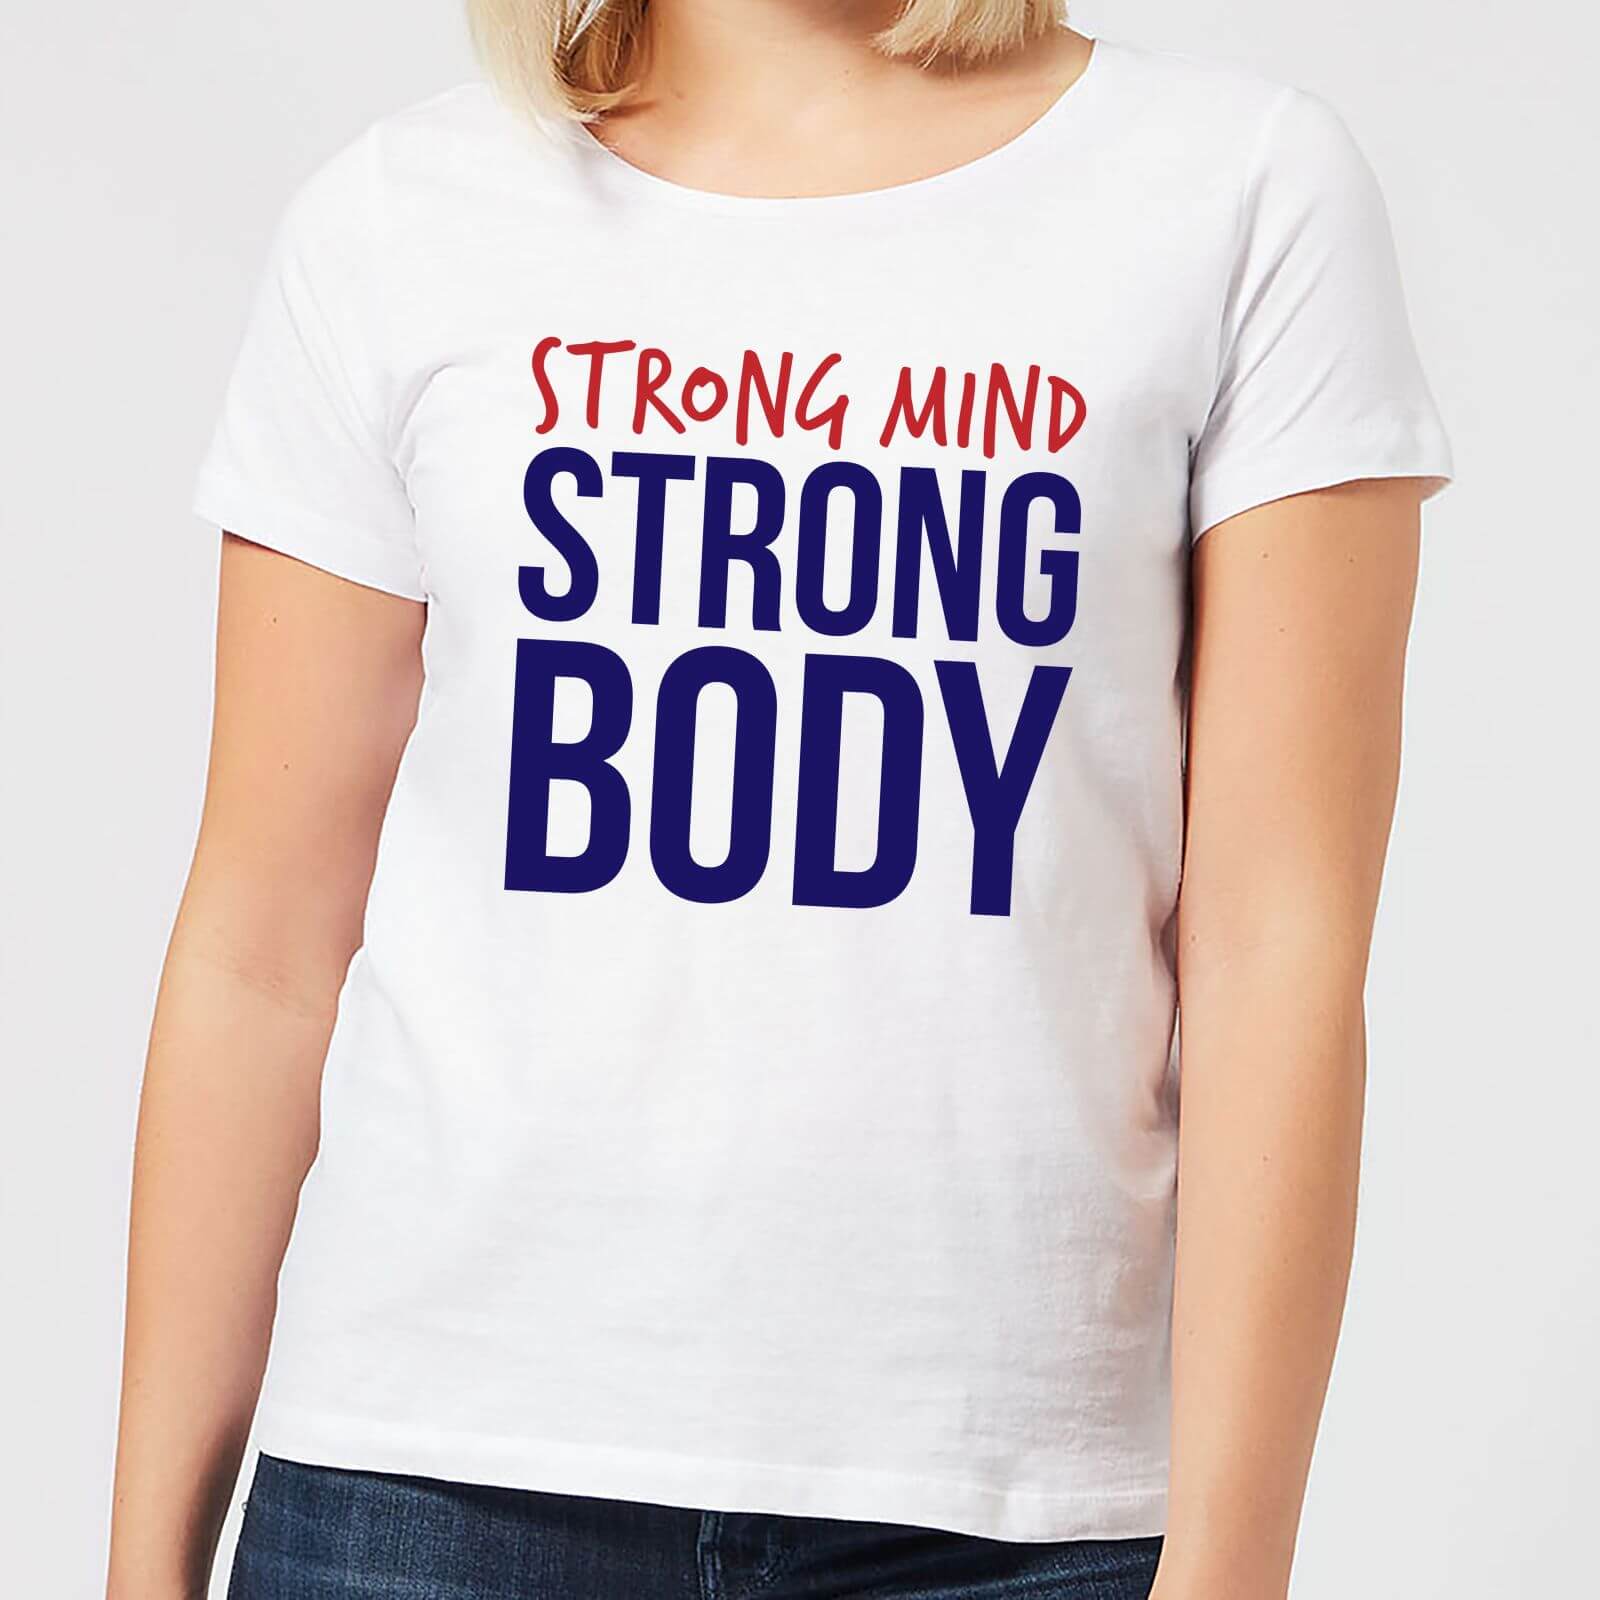 Strong Mind Strong Body Women's T-Shirt - White - L - White